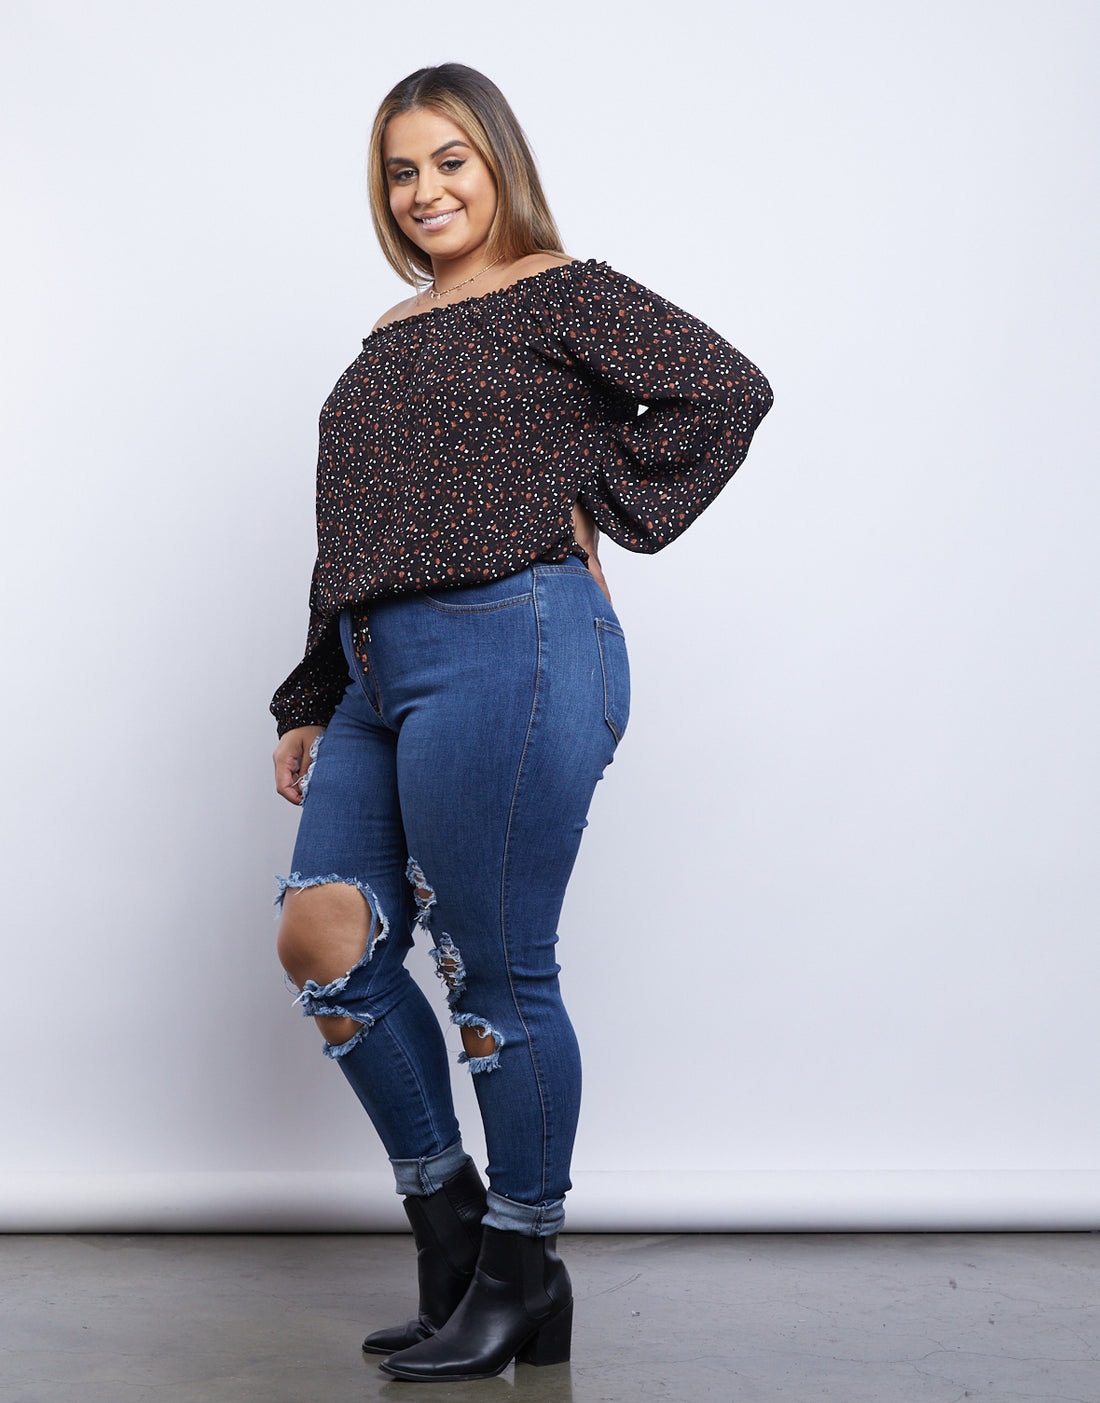 Curve Darling Dainty Floral Print Top Plus Size Tops -2020AVE